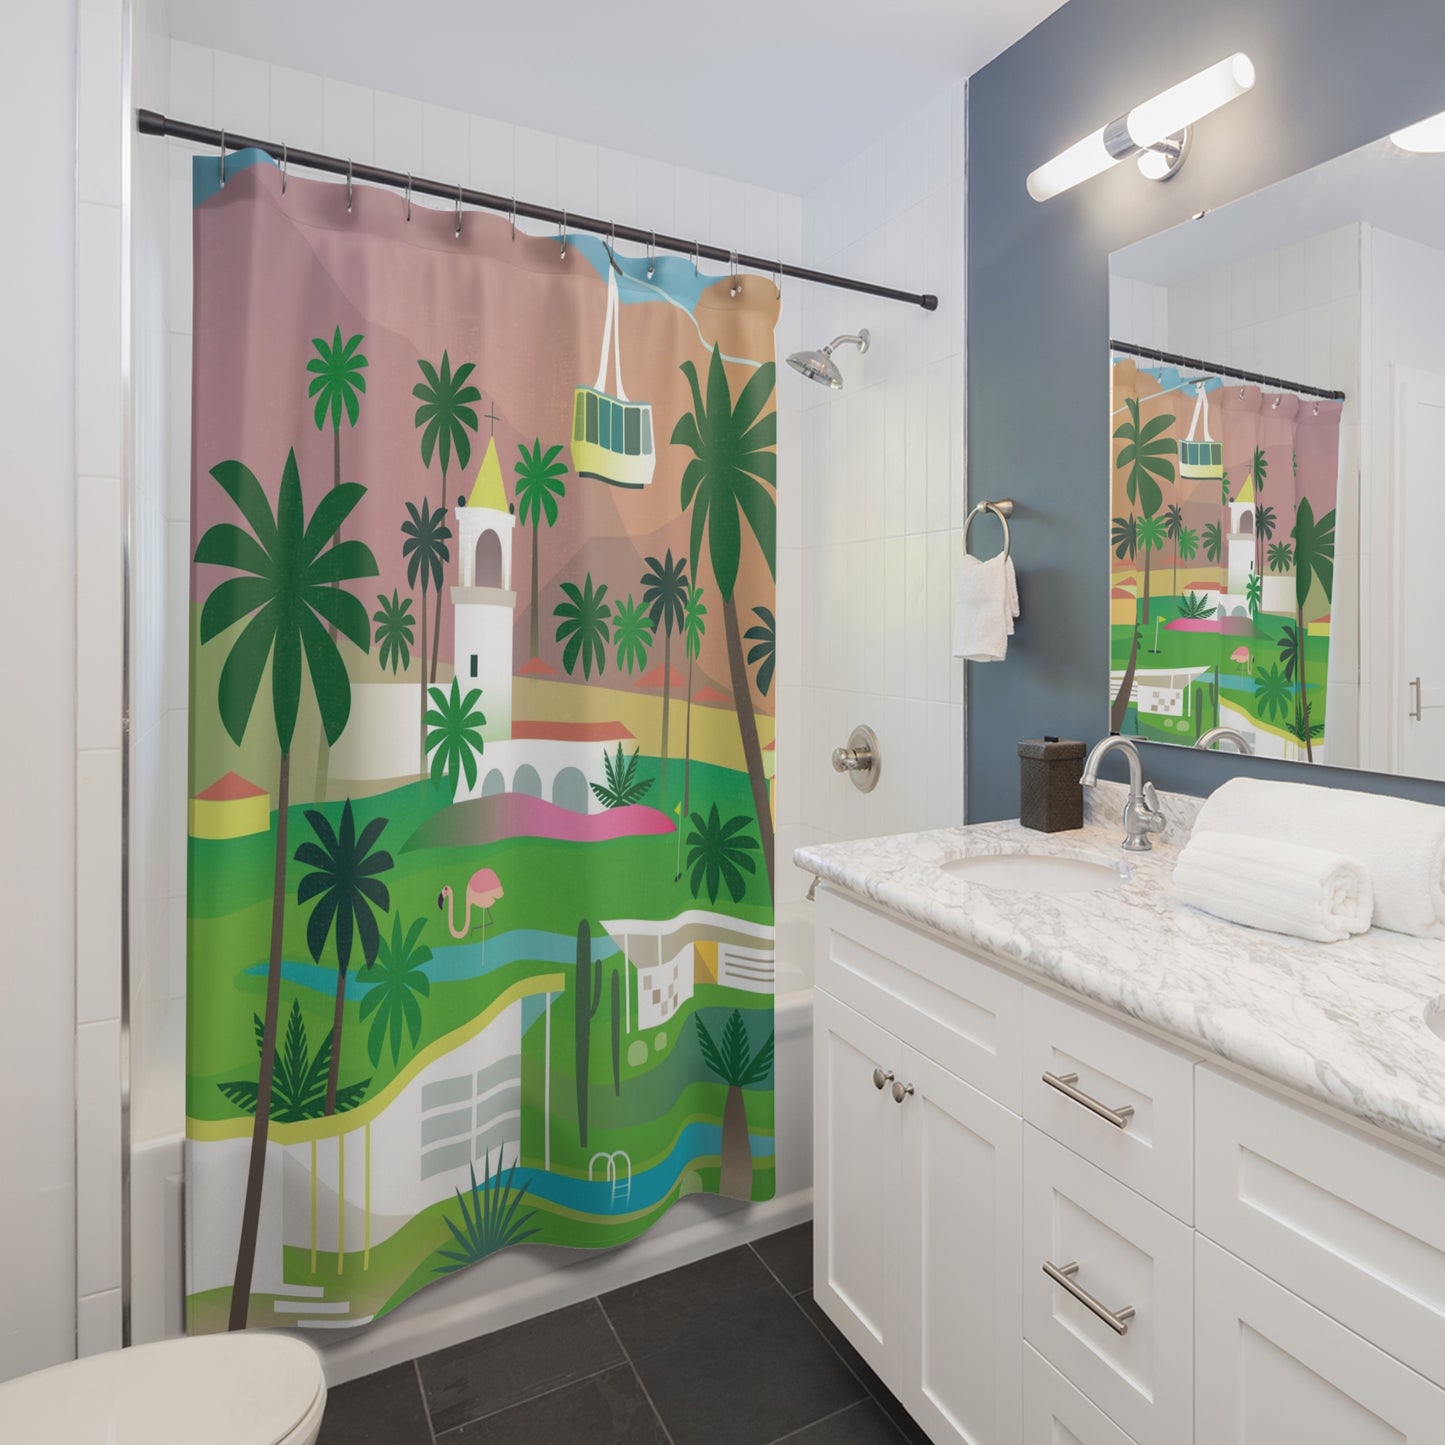 Palm Springs Shower Curtain